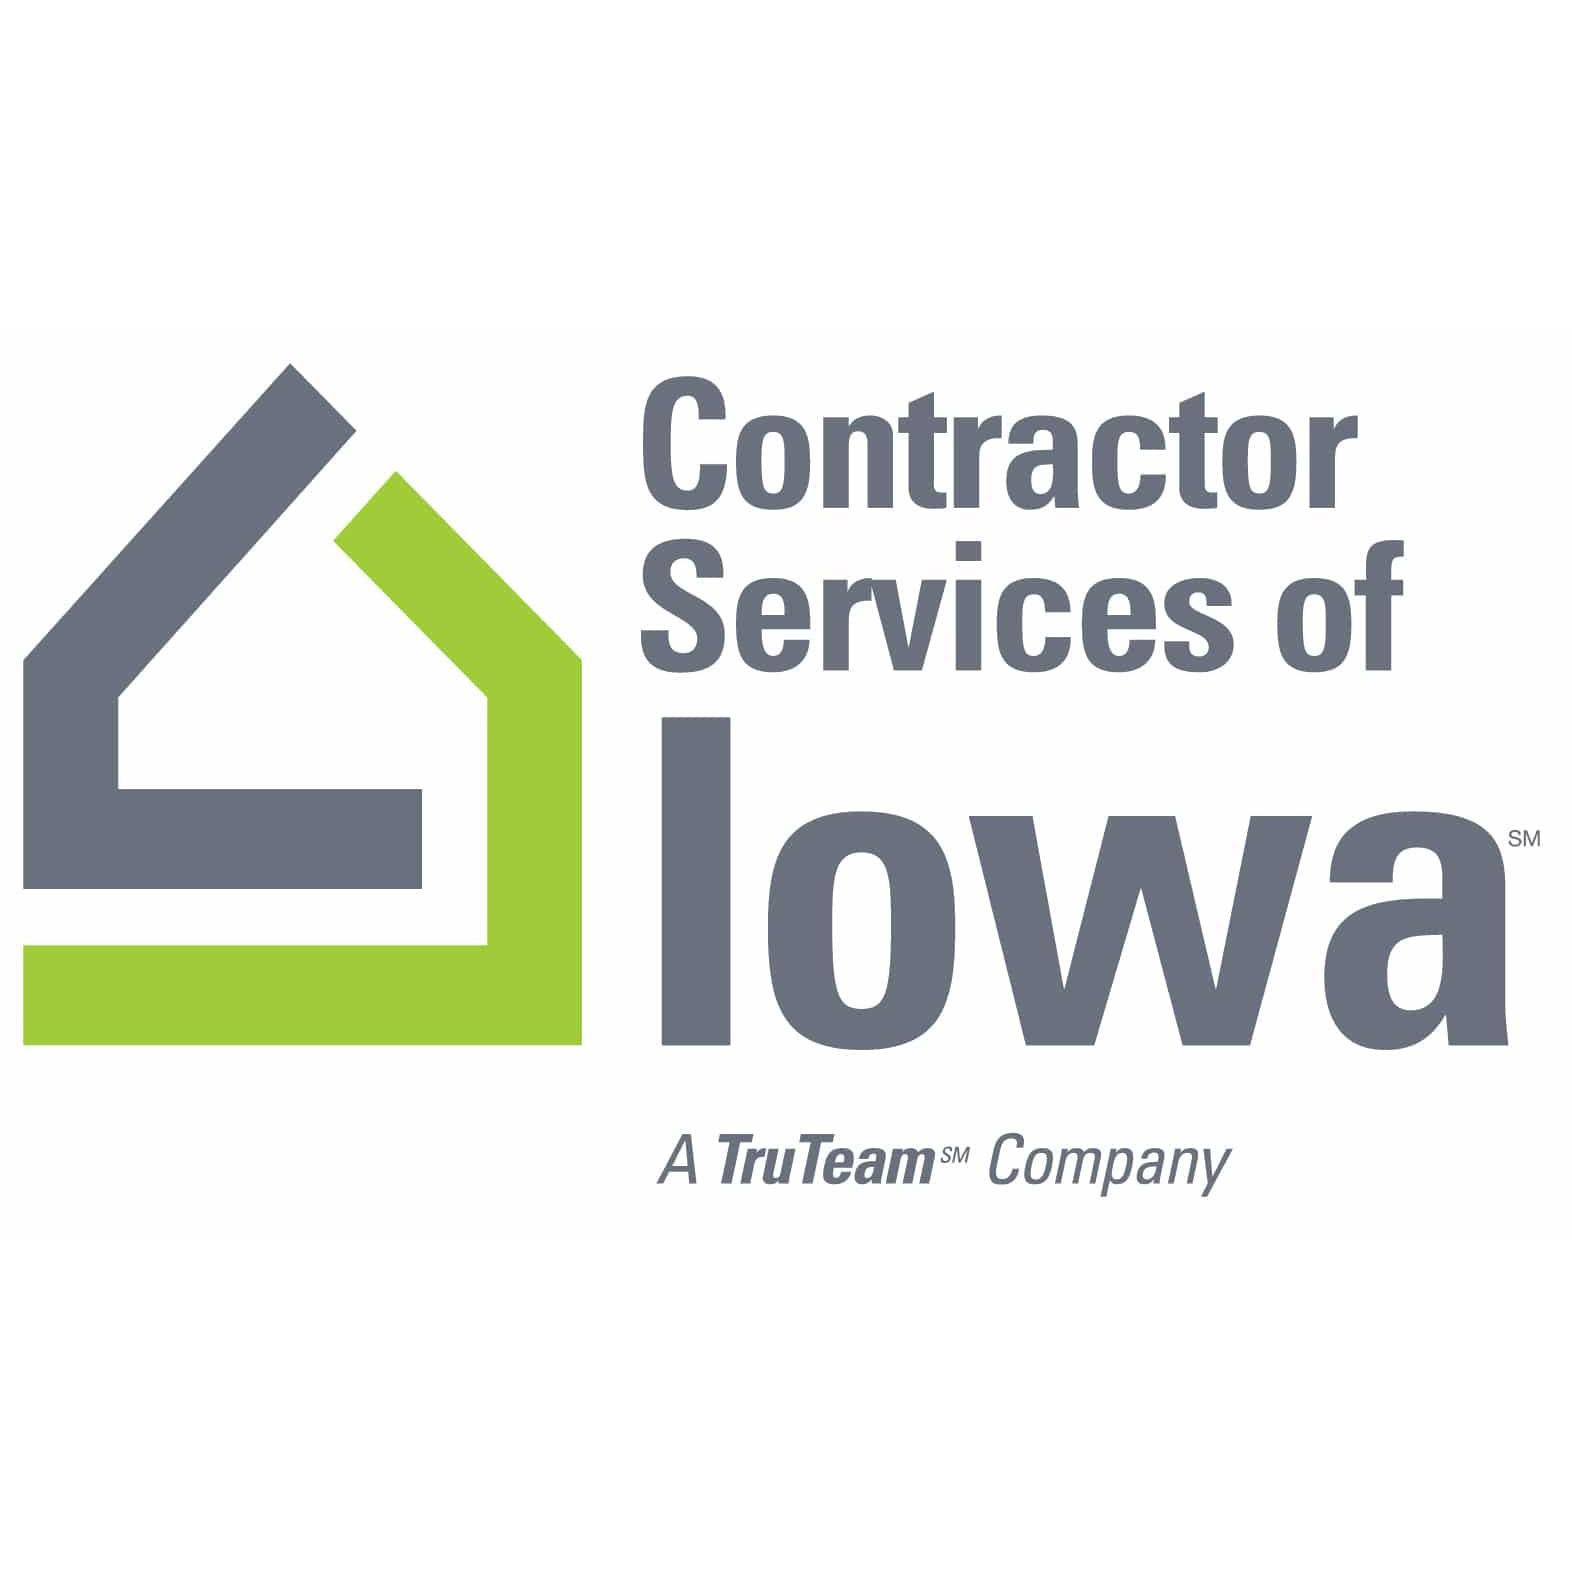 Contractor Services of Iowa